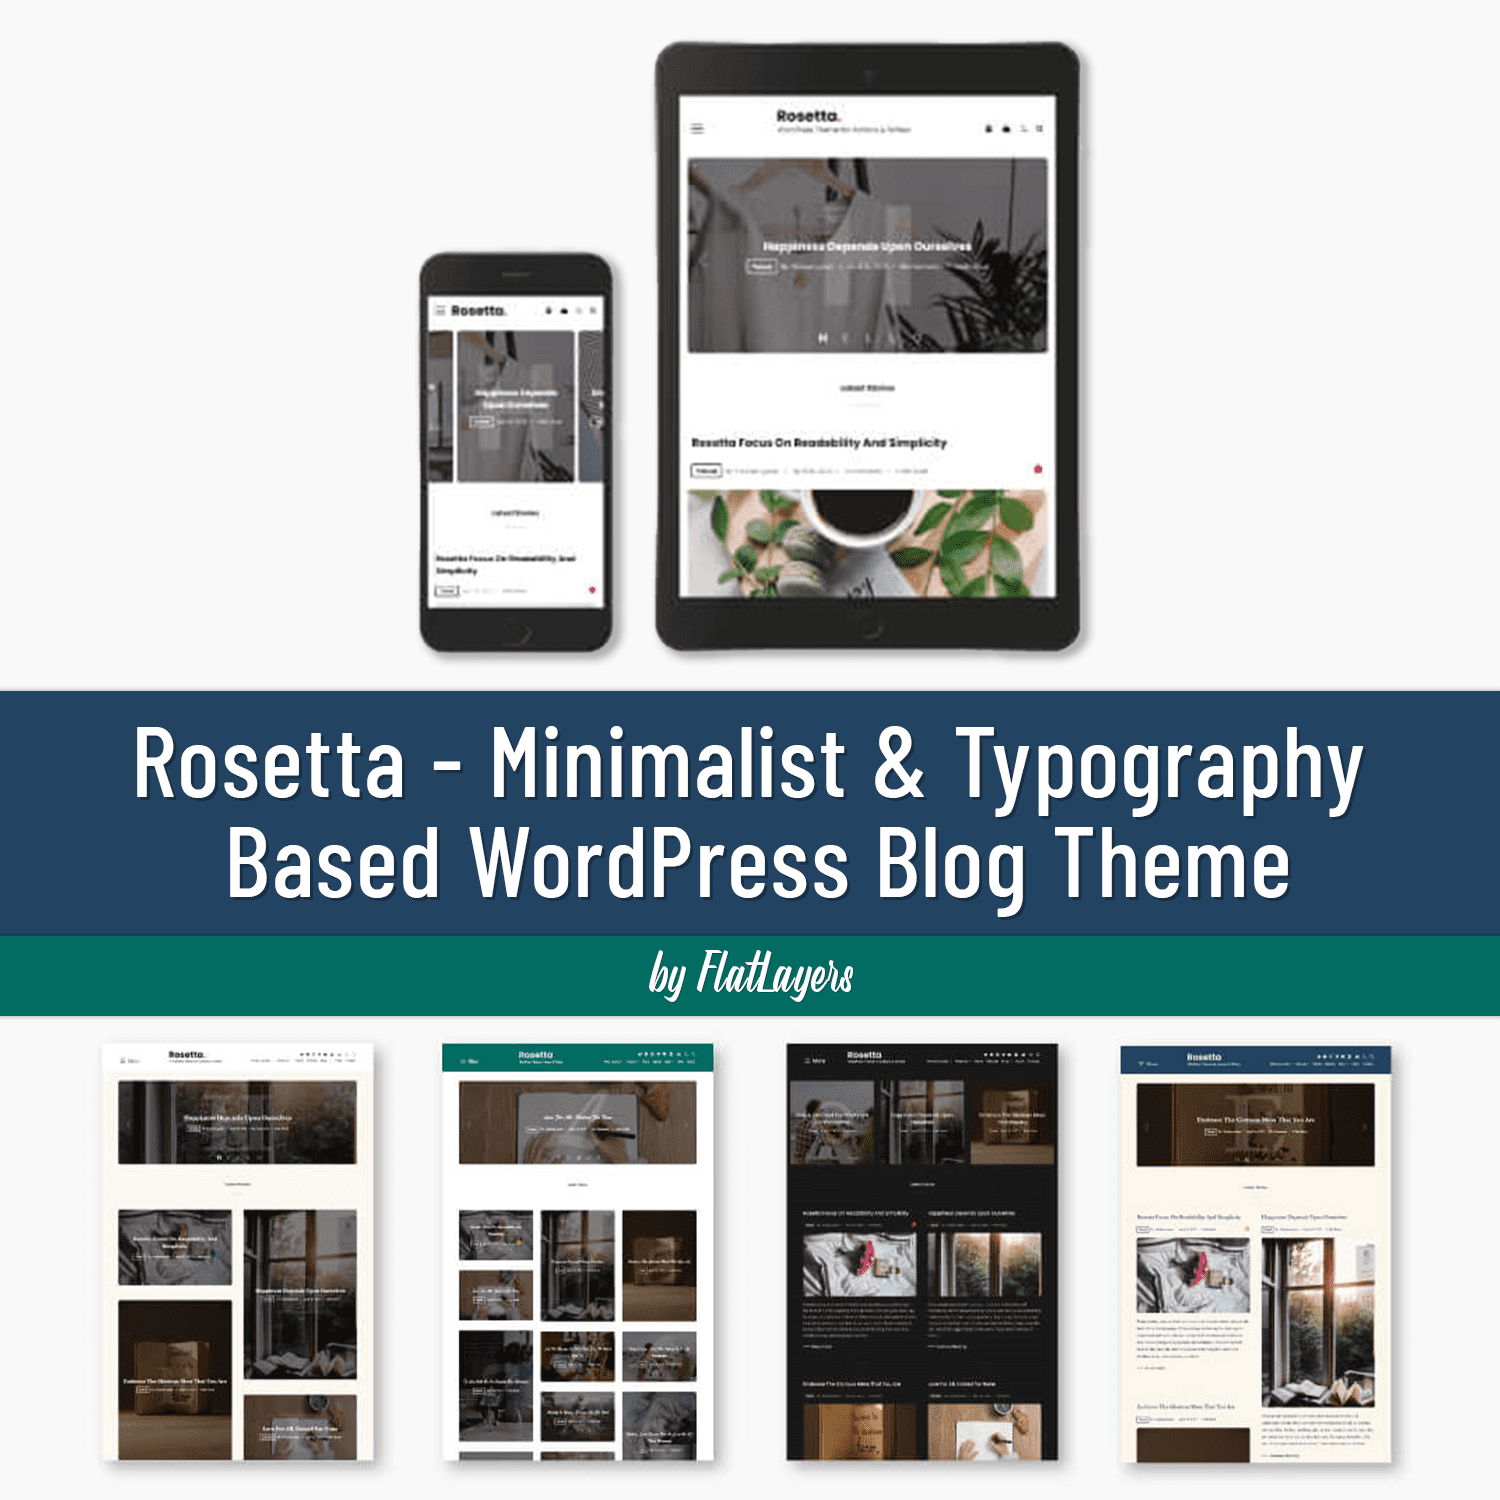 Preview Rosetta WordPress blog theme on the mobile and on the tablet.